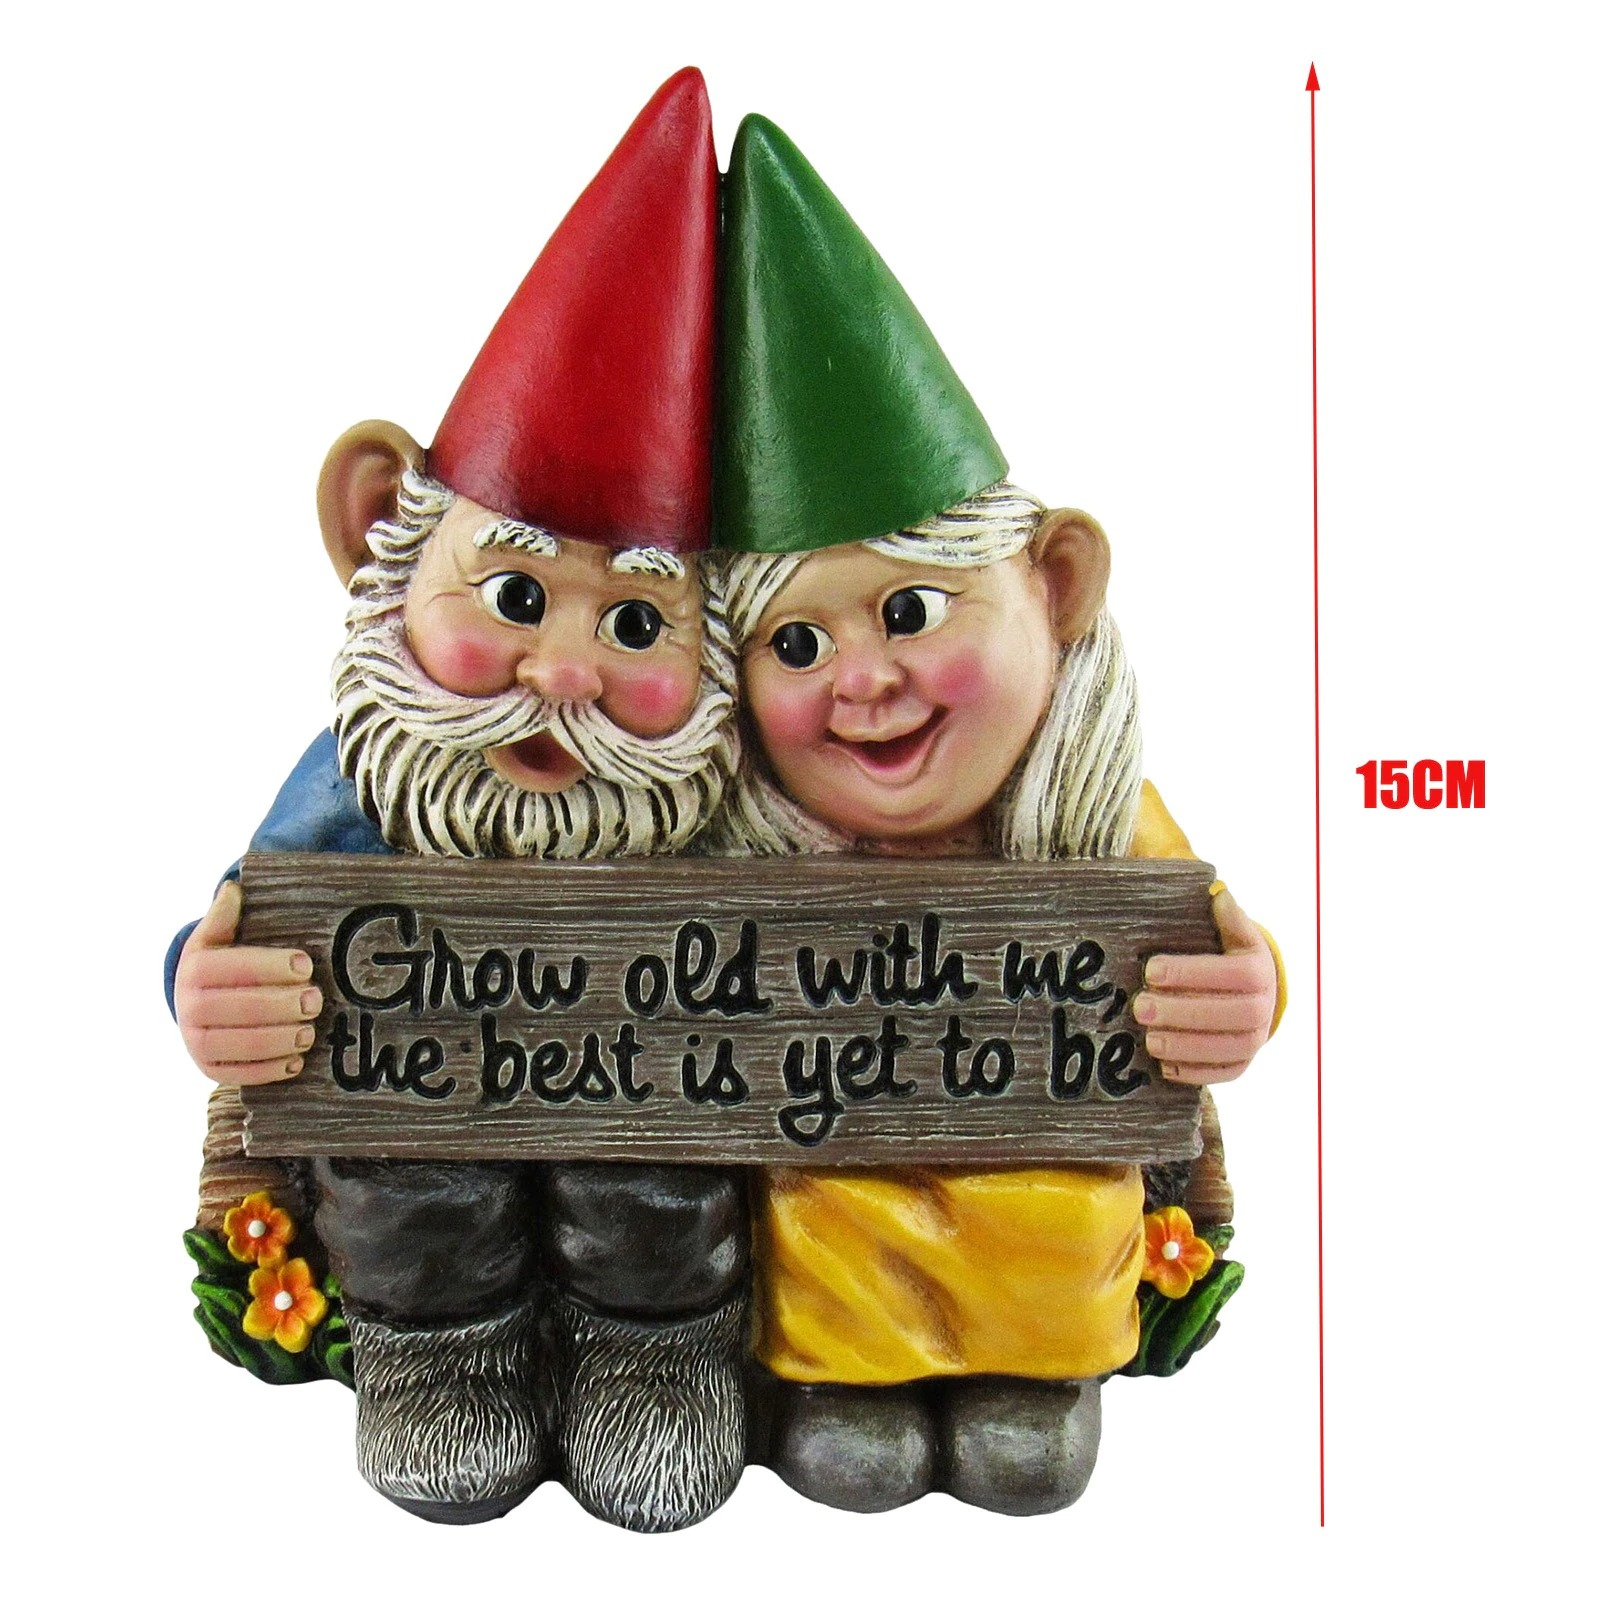 Rude Funny Garden Gnomes Naughty Male Gnome Statue Nude Novelty Gift